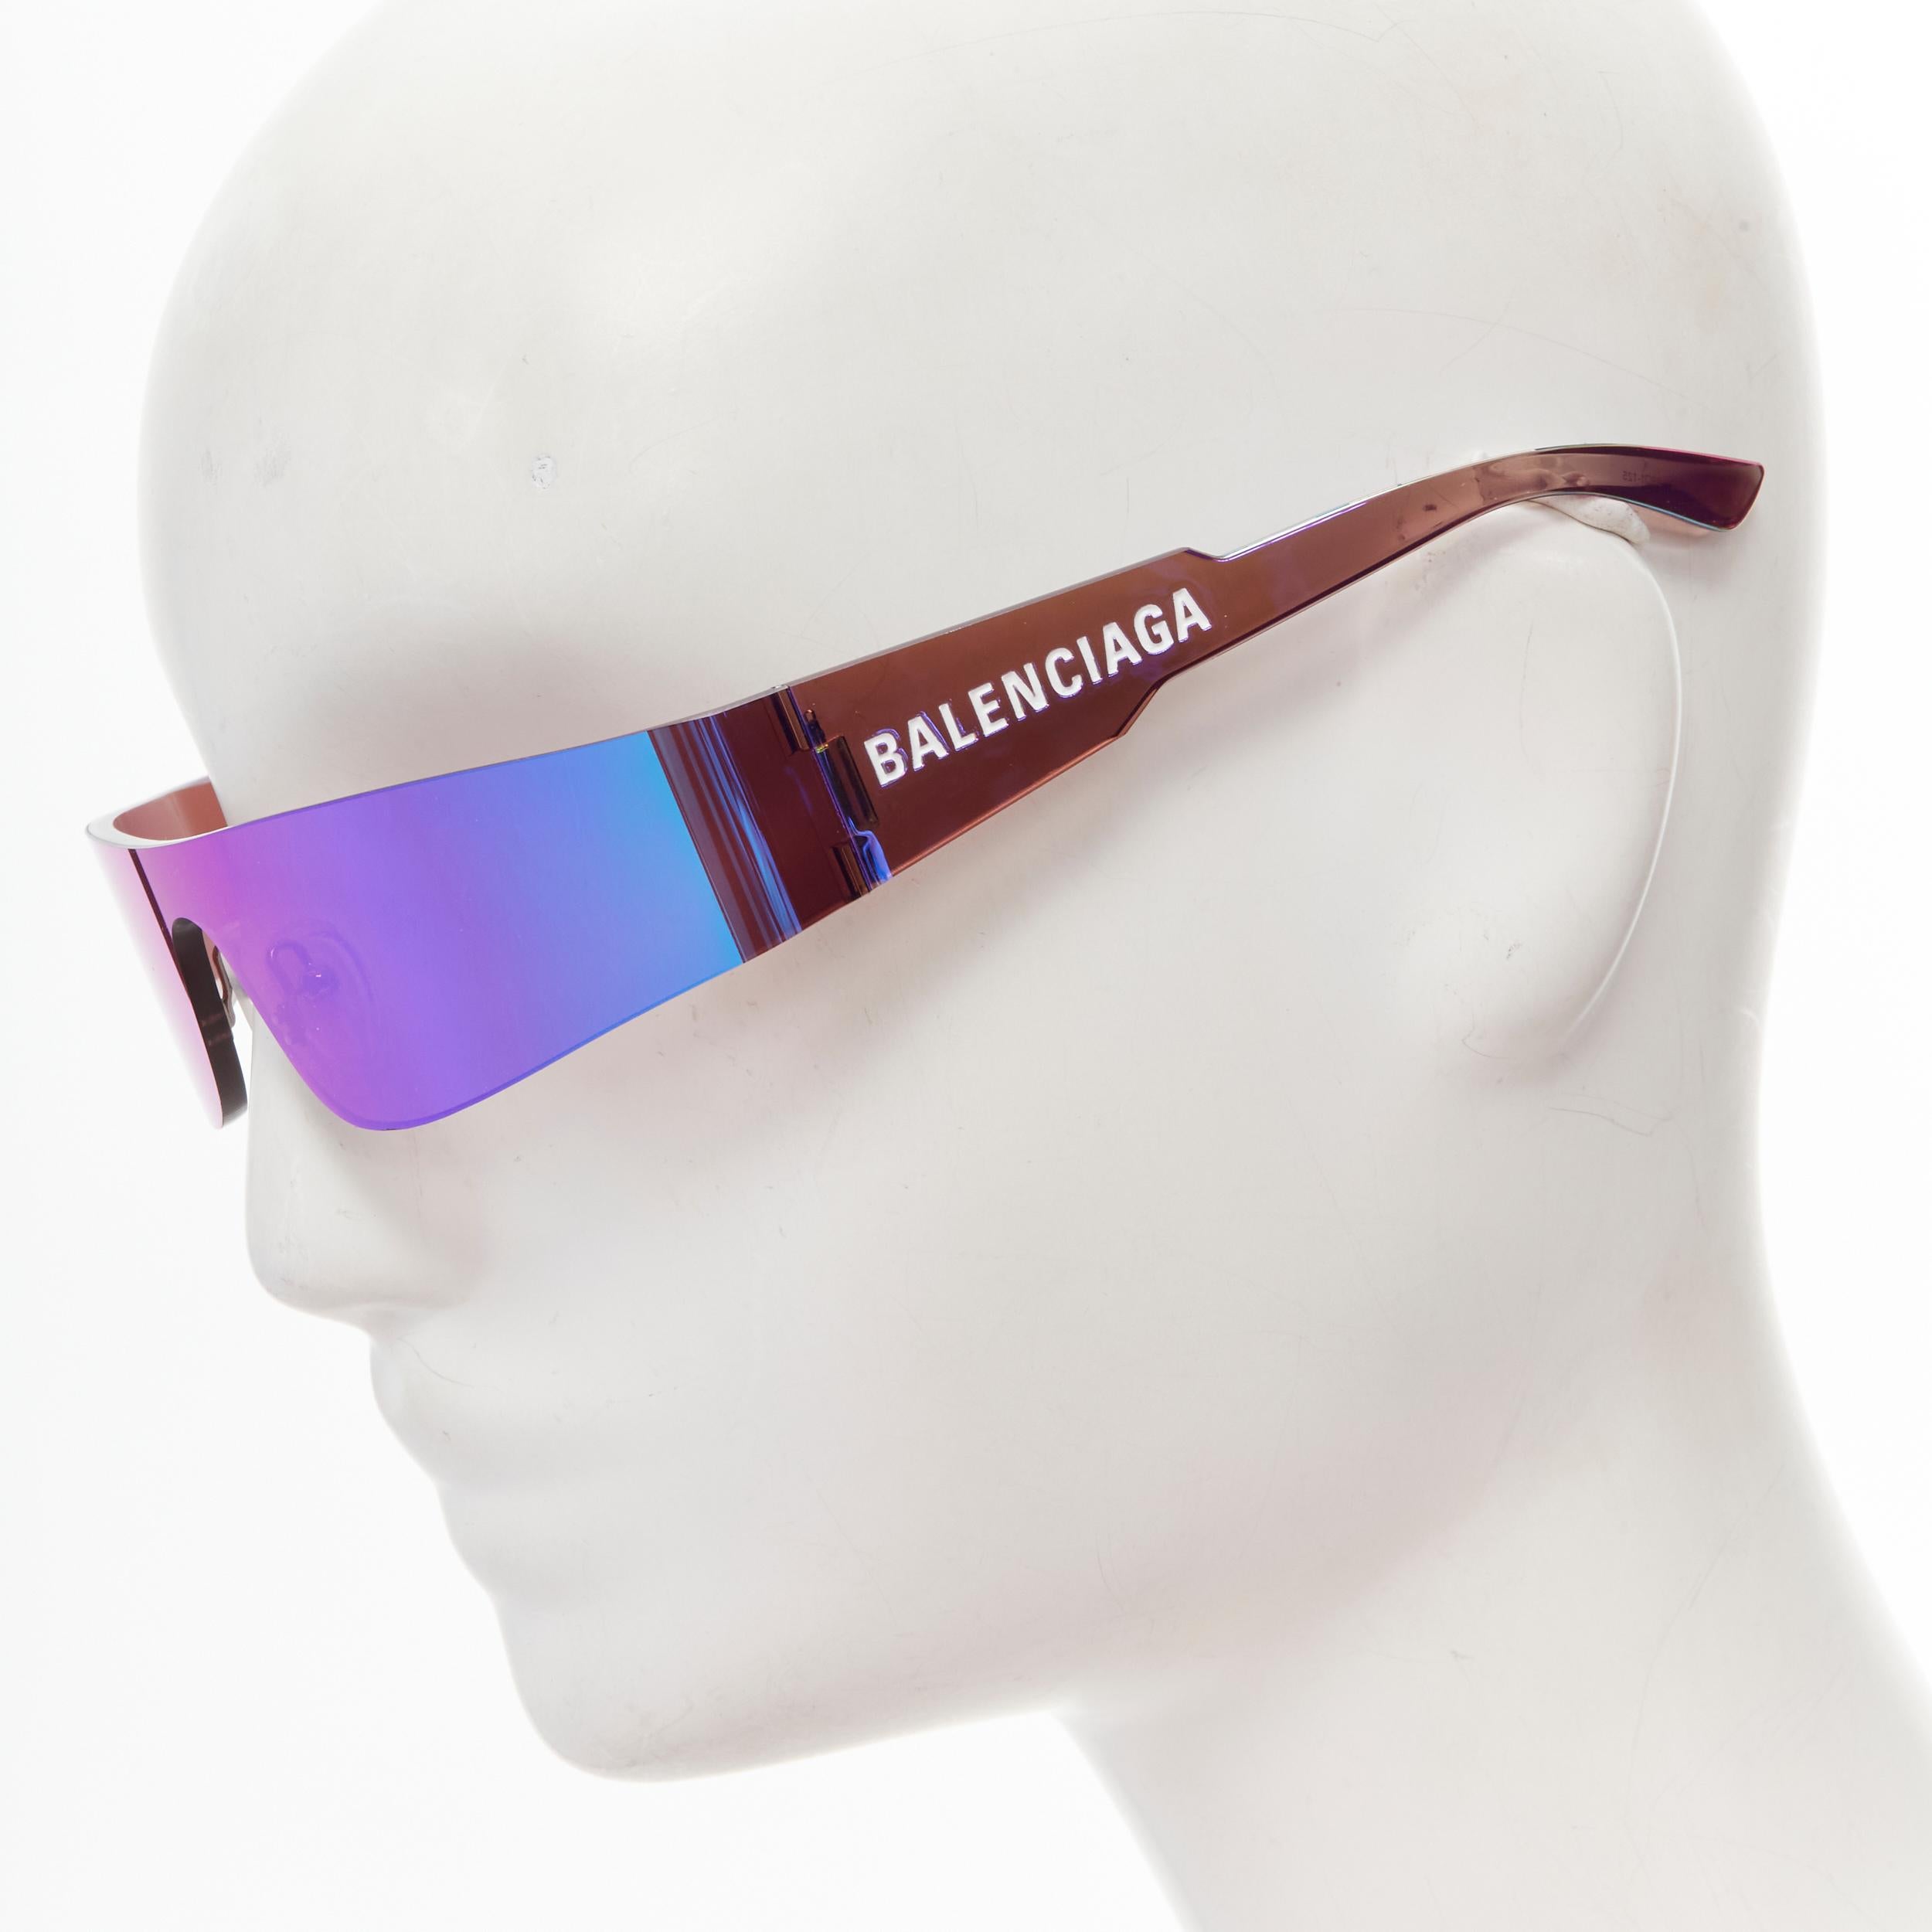 BALENCIAGA DEMNA BB00141S 003 purple reflective futuristic shield sunglasses 
Reference: ANWU/A00083 
Brand: Balenciaga 
Designer: Demna 
Material: Acetate 
Color: Purple 
Pattern: Solid 
Made in: Japan 

CONDITION: 
Condition: Excellent, this item